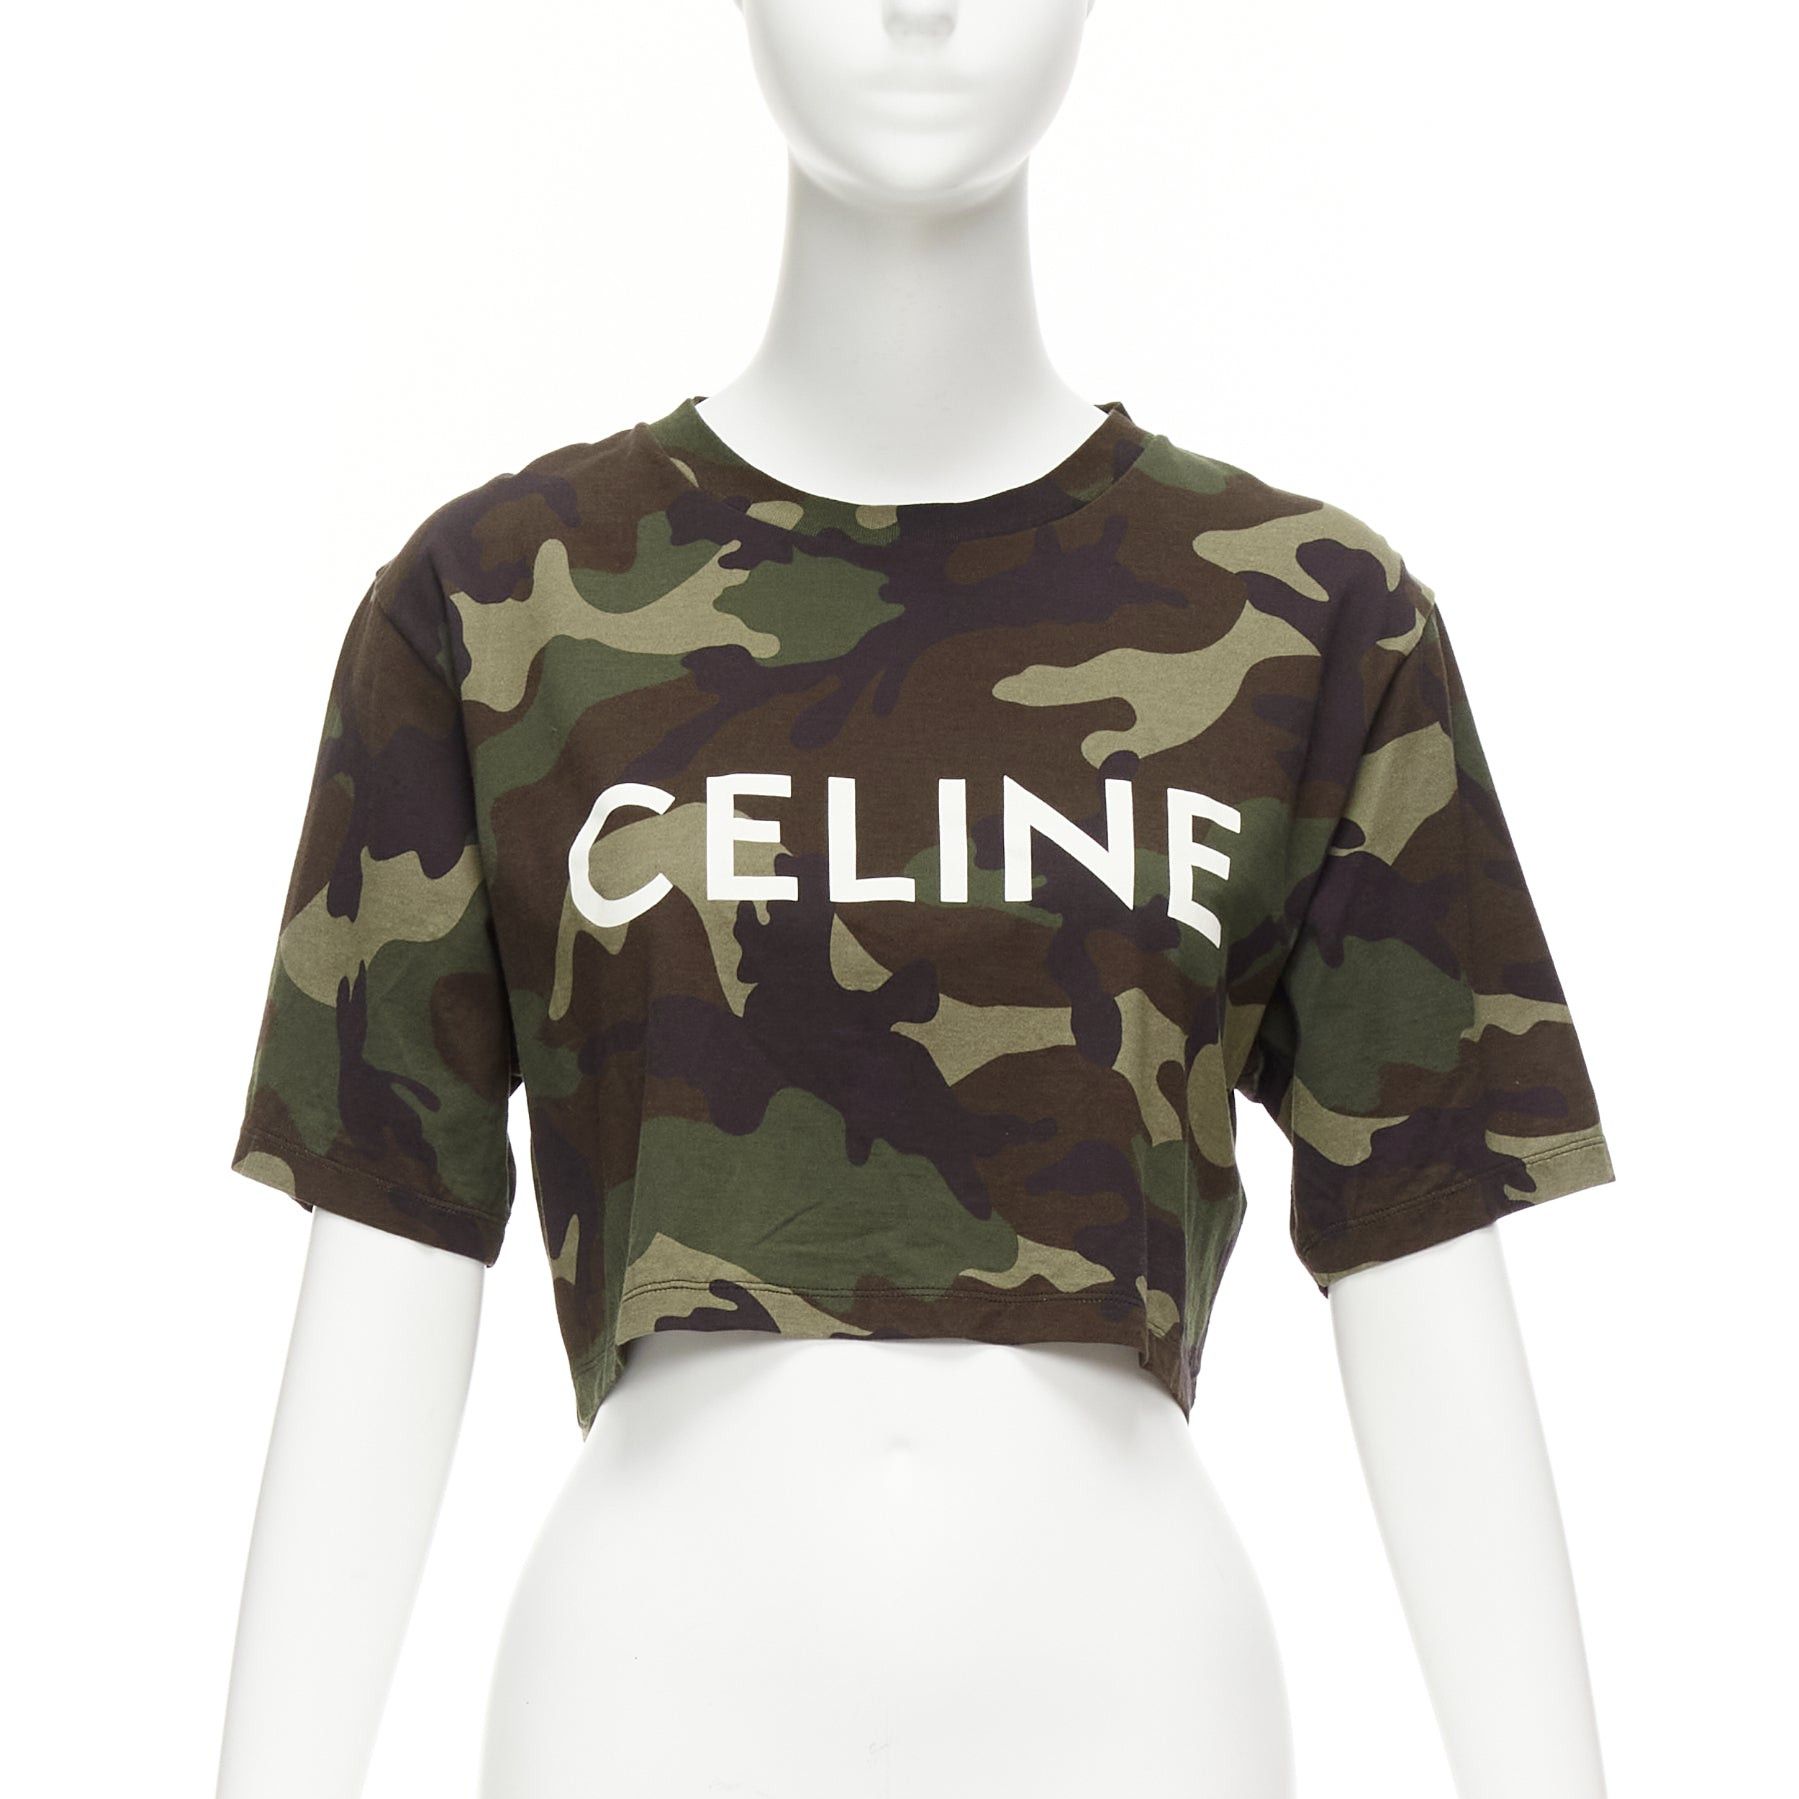 image of Celine Green Camouflage Cotton Big White Logo Cropped Tshirt Top Xs, Women's (Size Small)